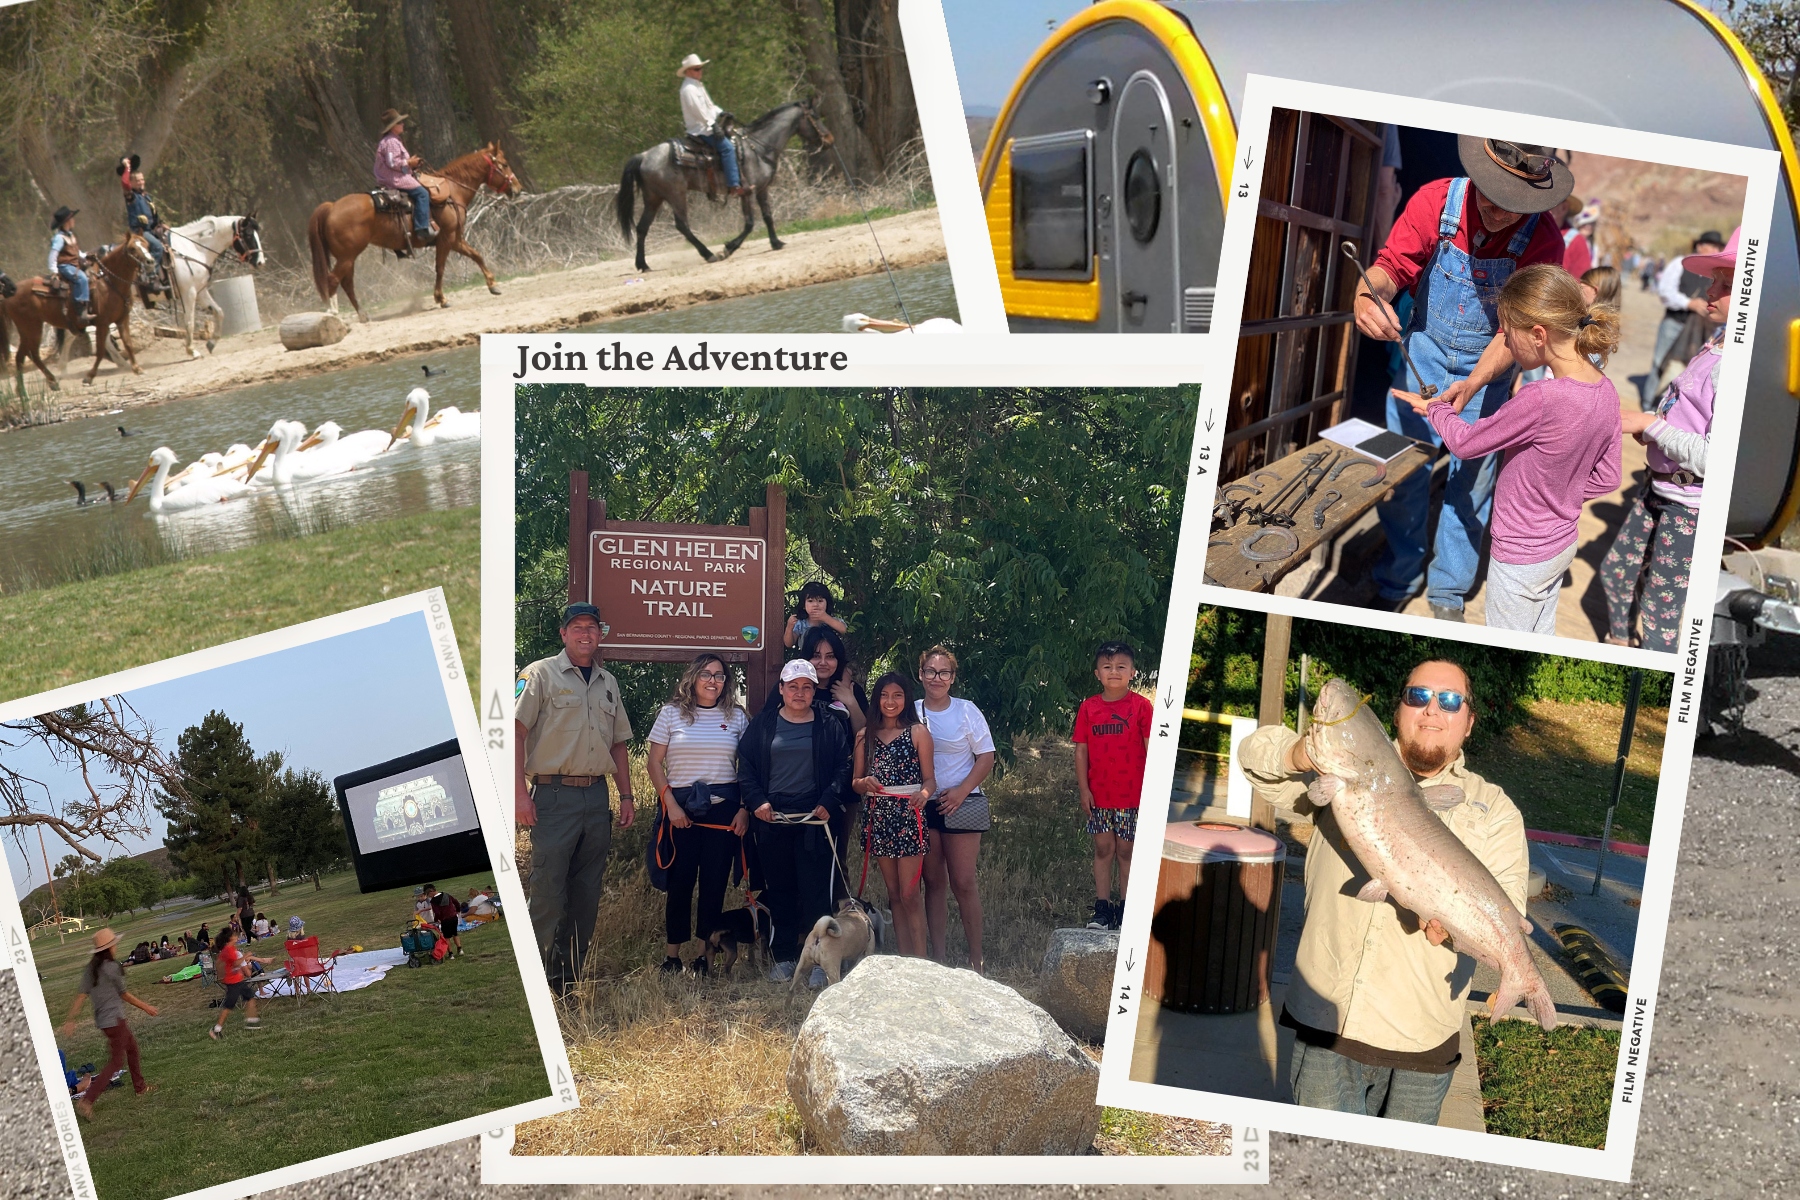 Collage of photos showing tourists engaging in picnicking, fishing, horseback ridinga nd more.